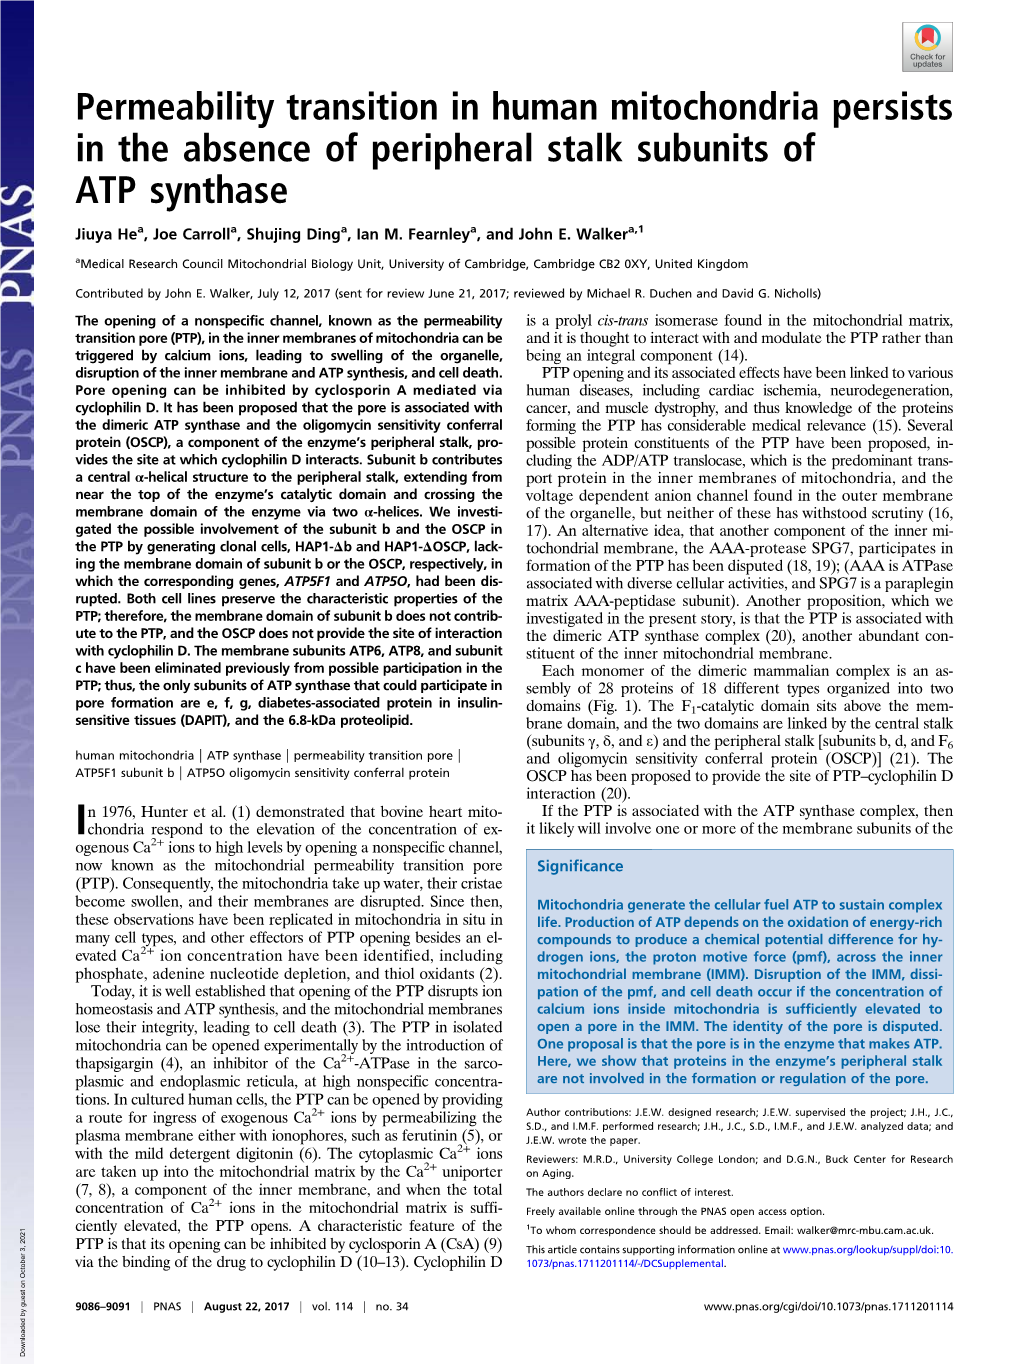 Permeability Transition in Human Mitochondria Persists in the Absence of Peripheral Stalk Subunits of ATP Synthase